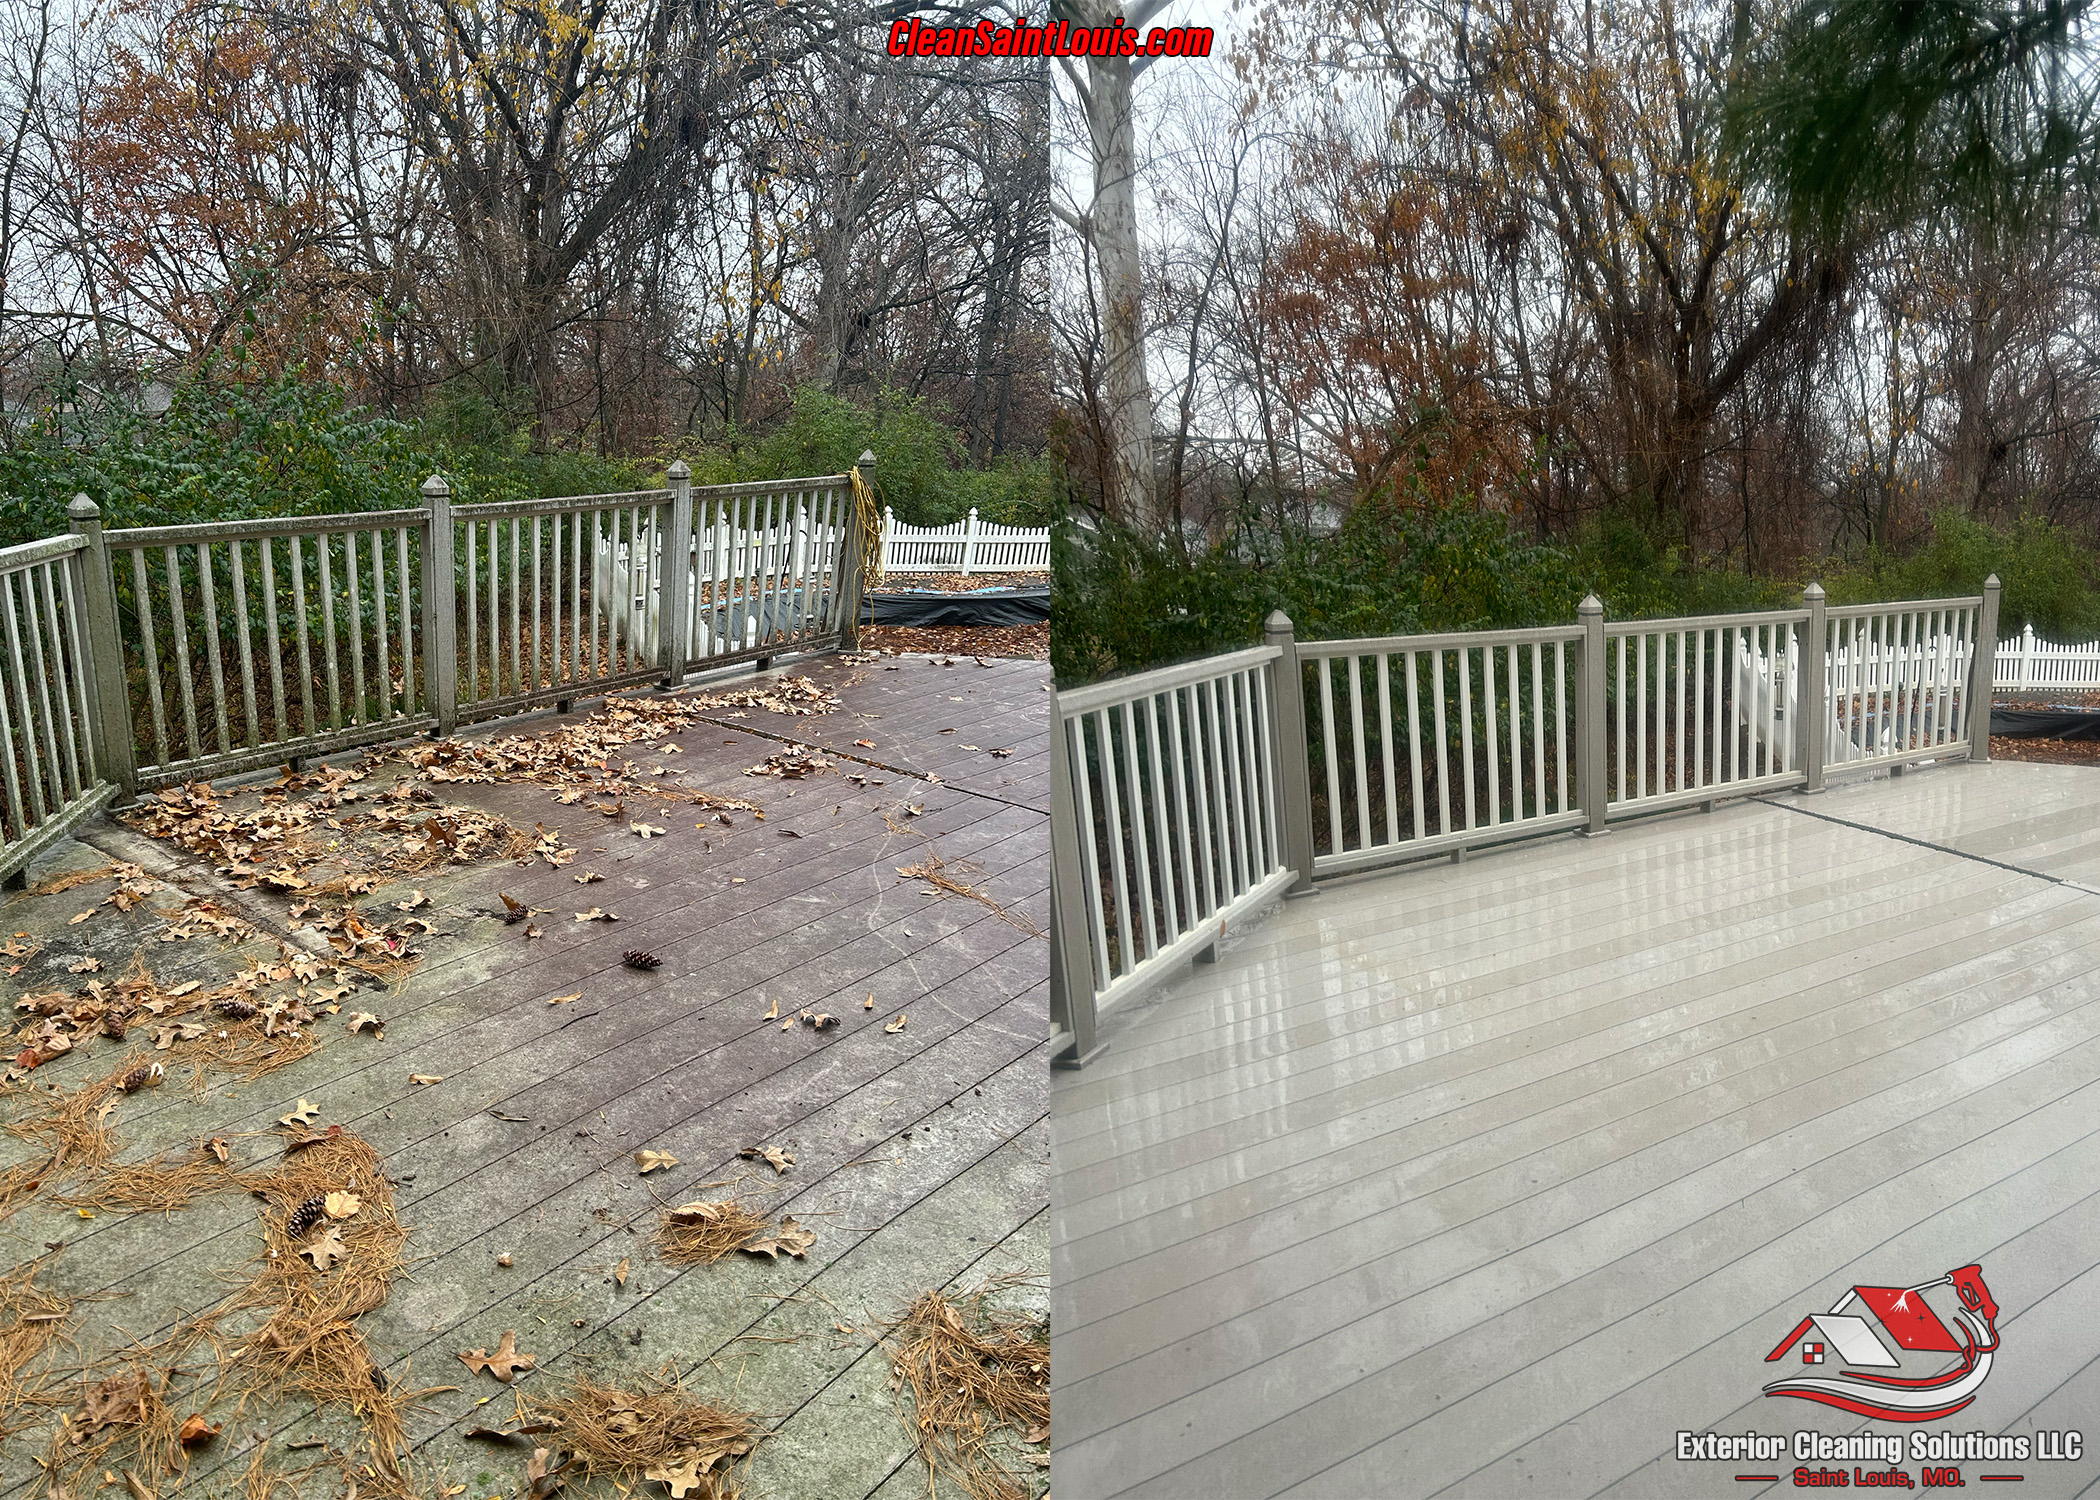 Preserve Your Back Yard Hangout: Softwash Deck Cleaning in OFallon MO.